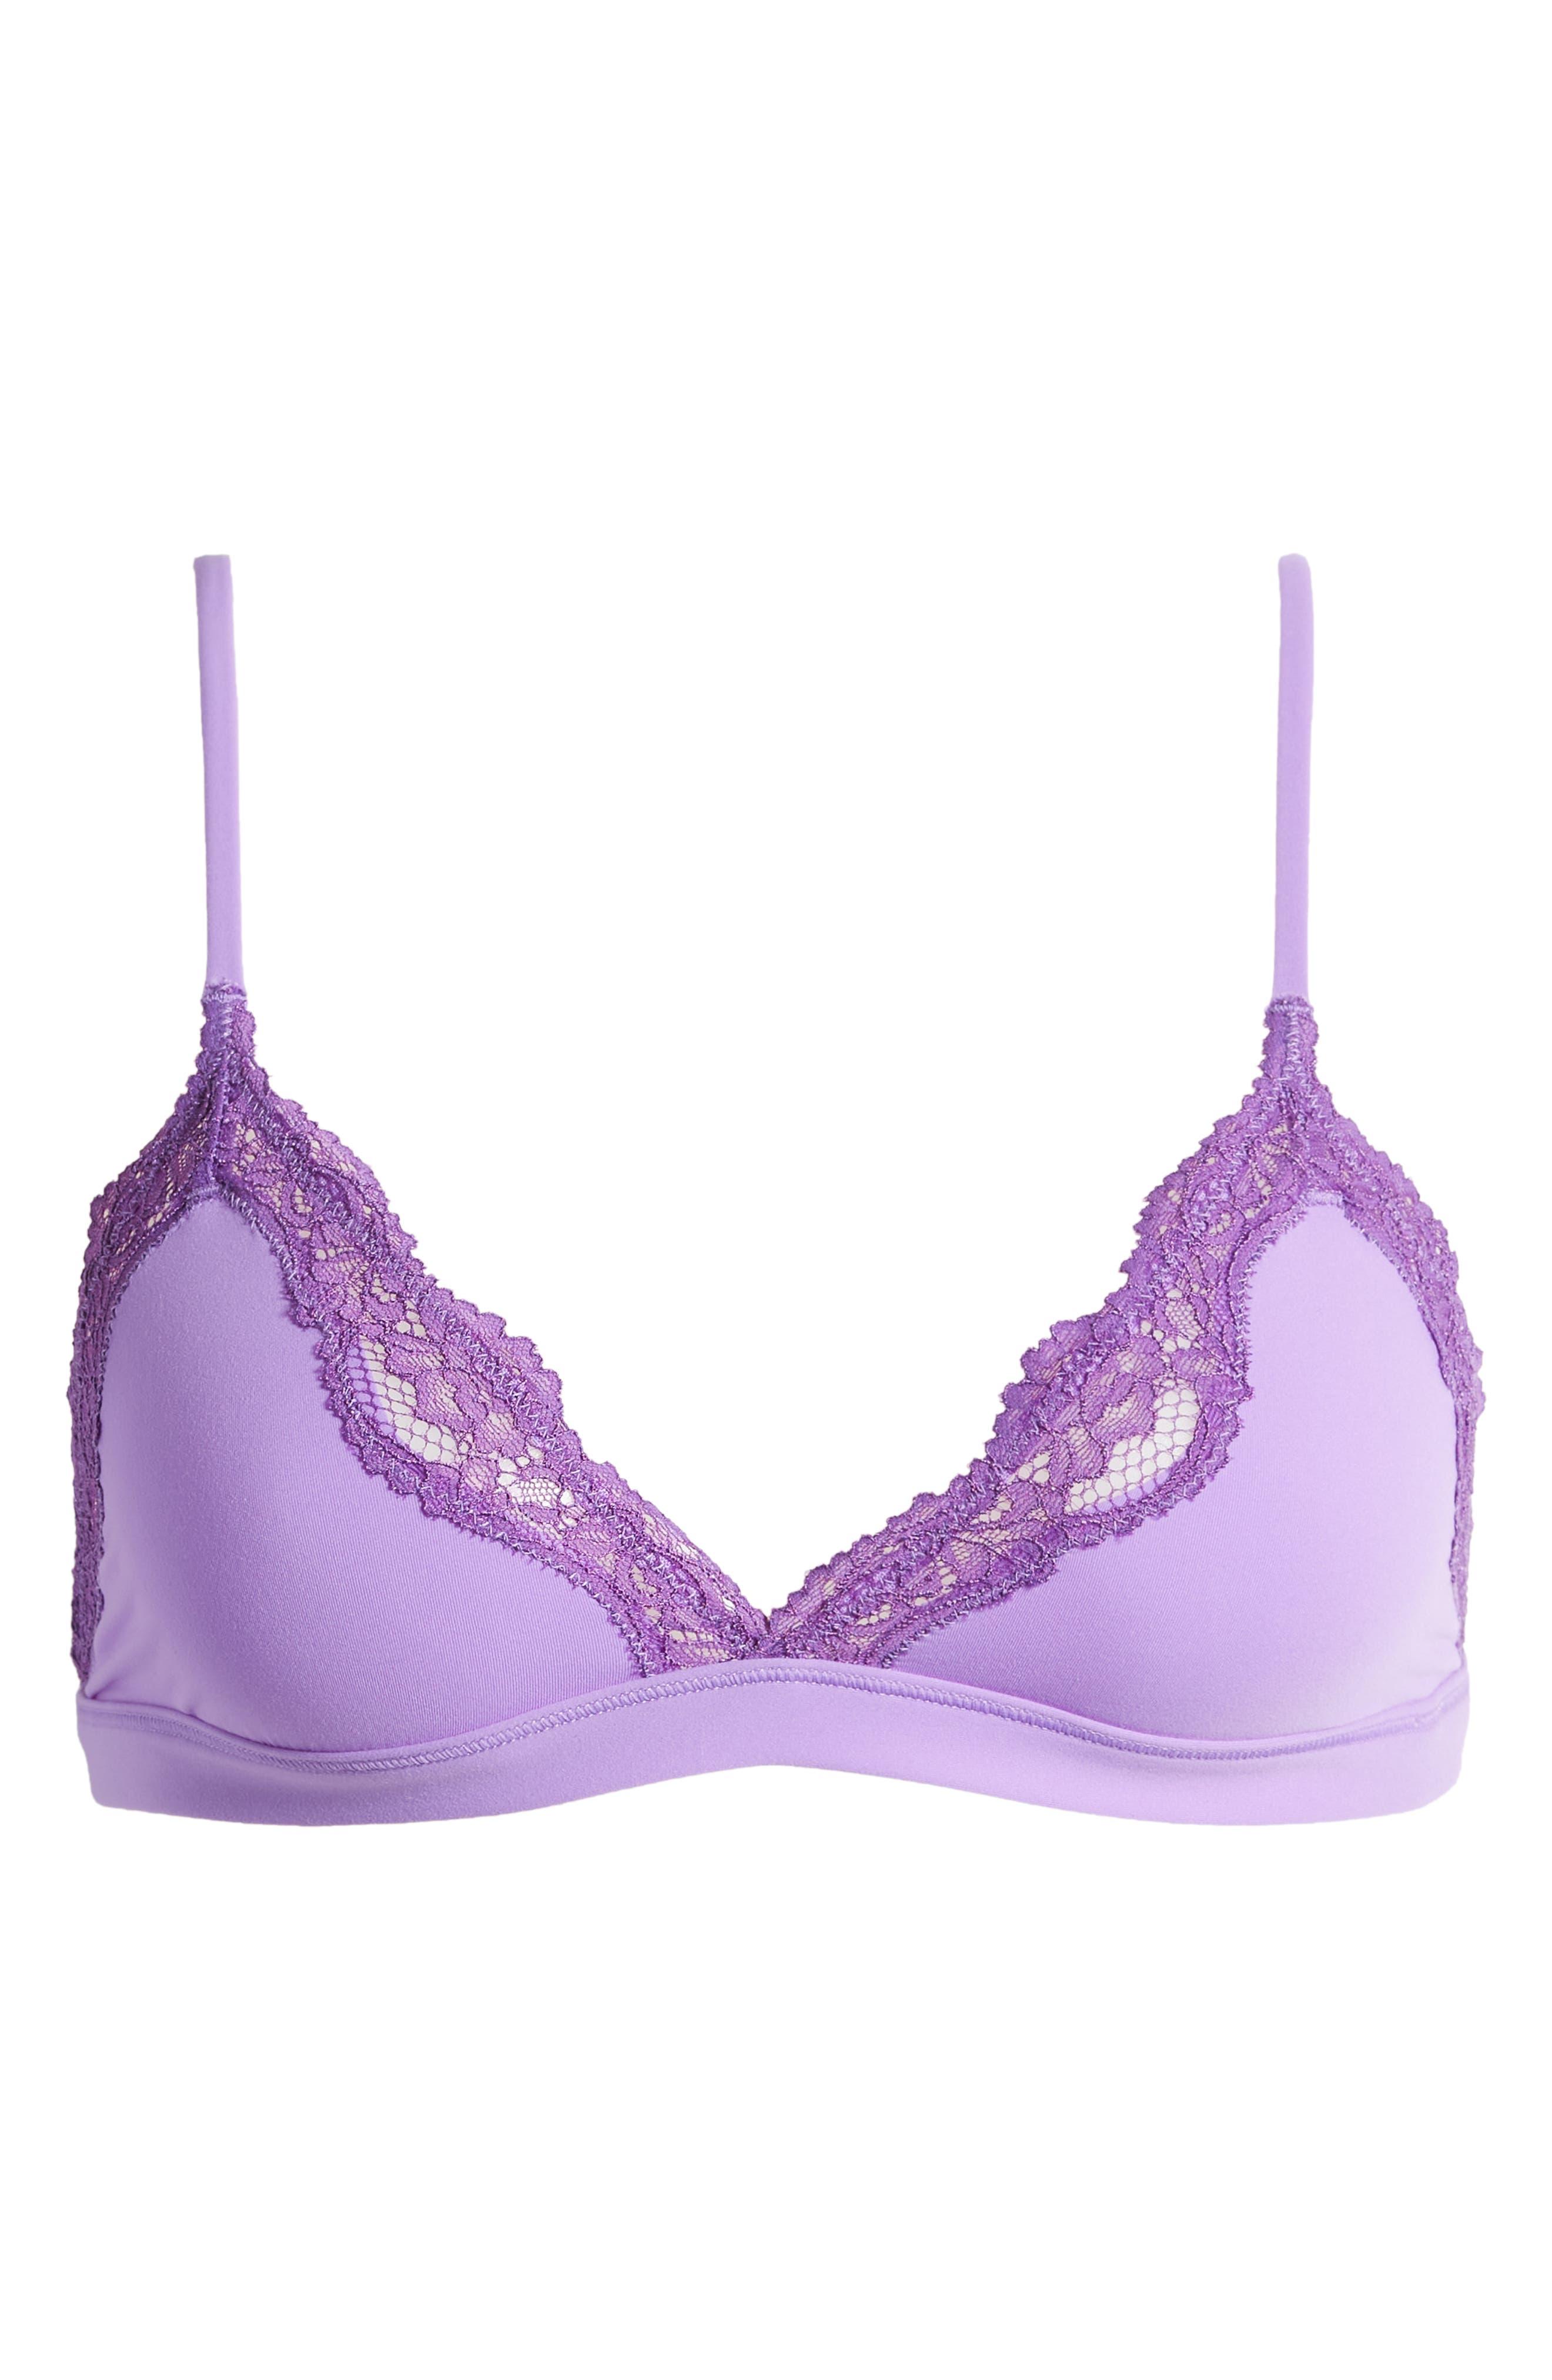 Skims Fits Everybody Lace Triangle Bralette in Purple